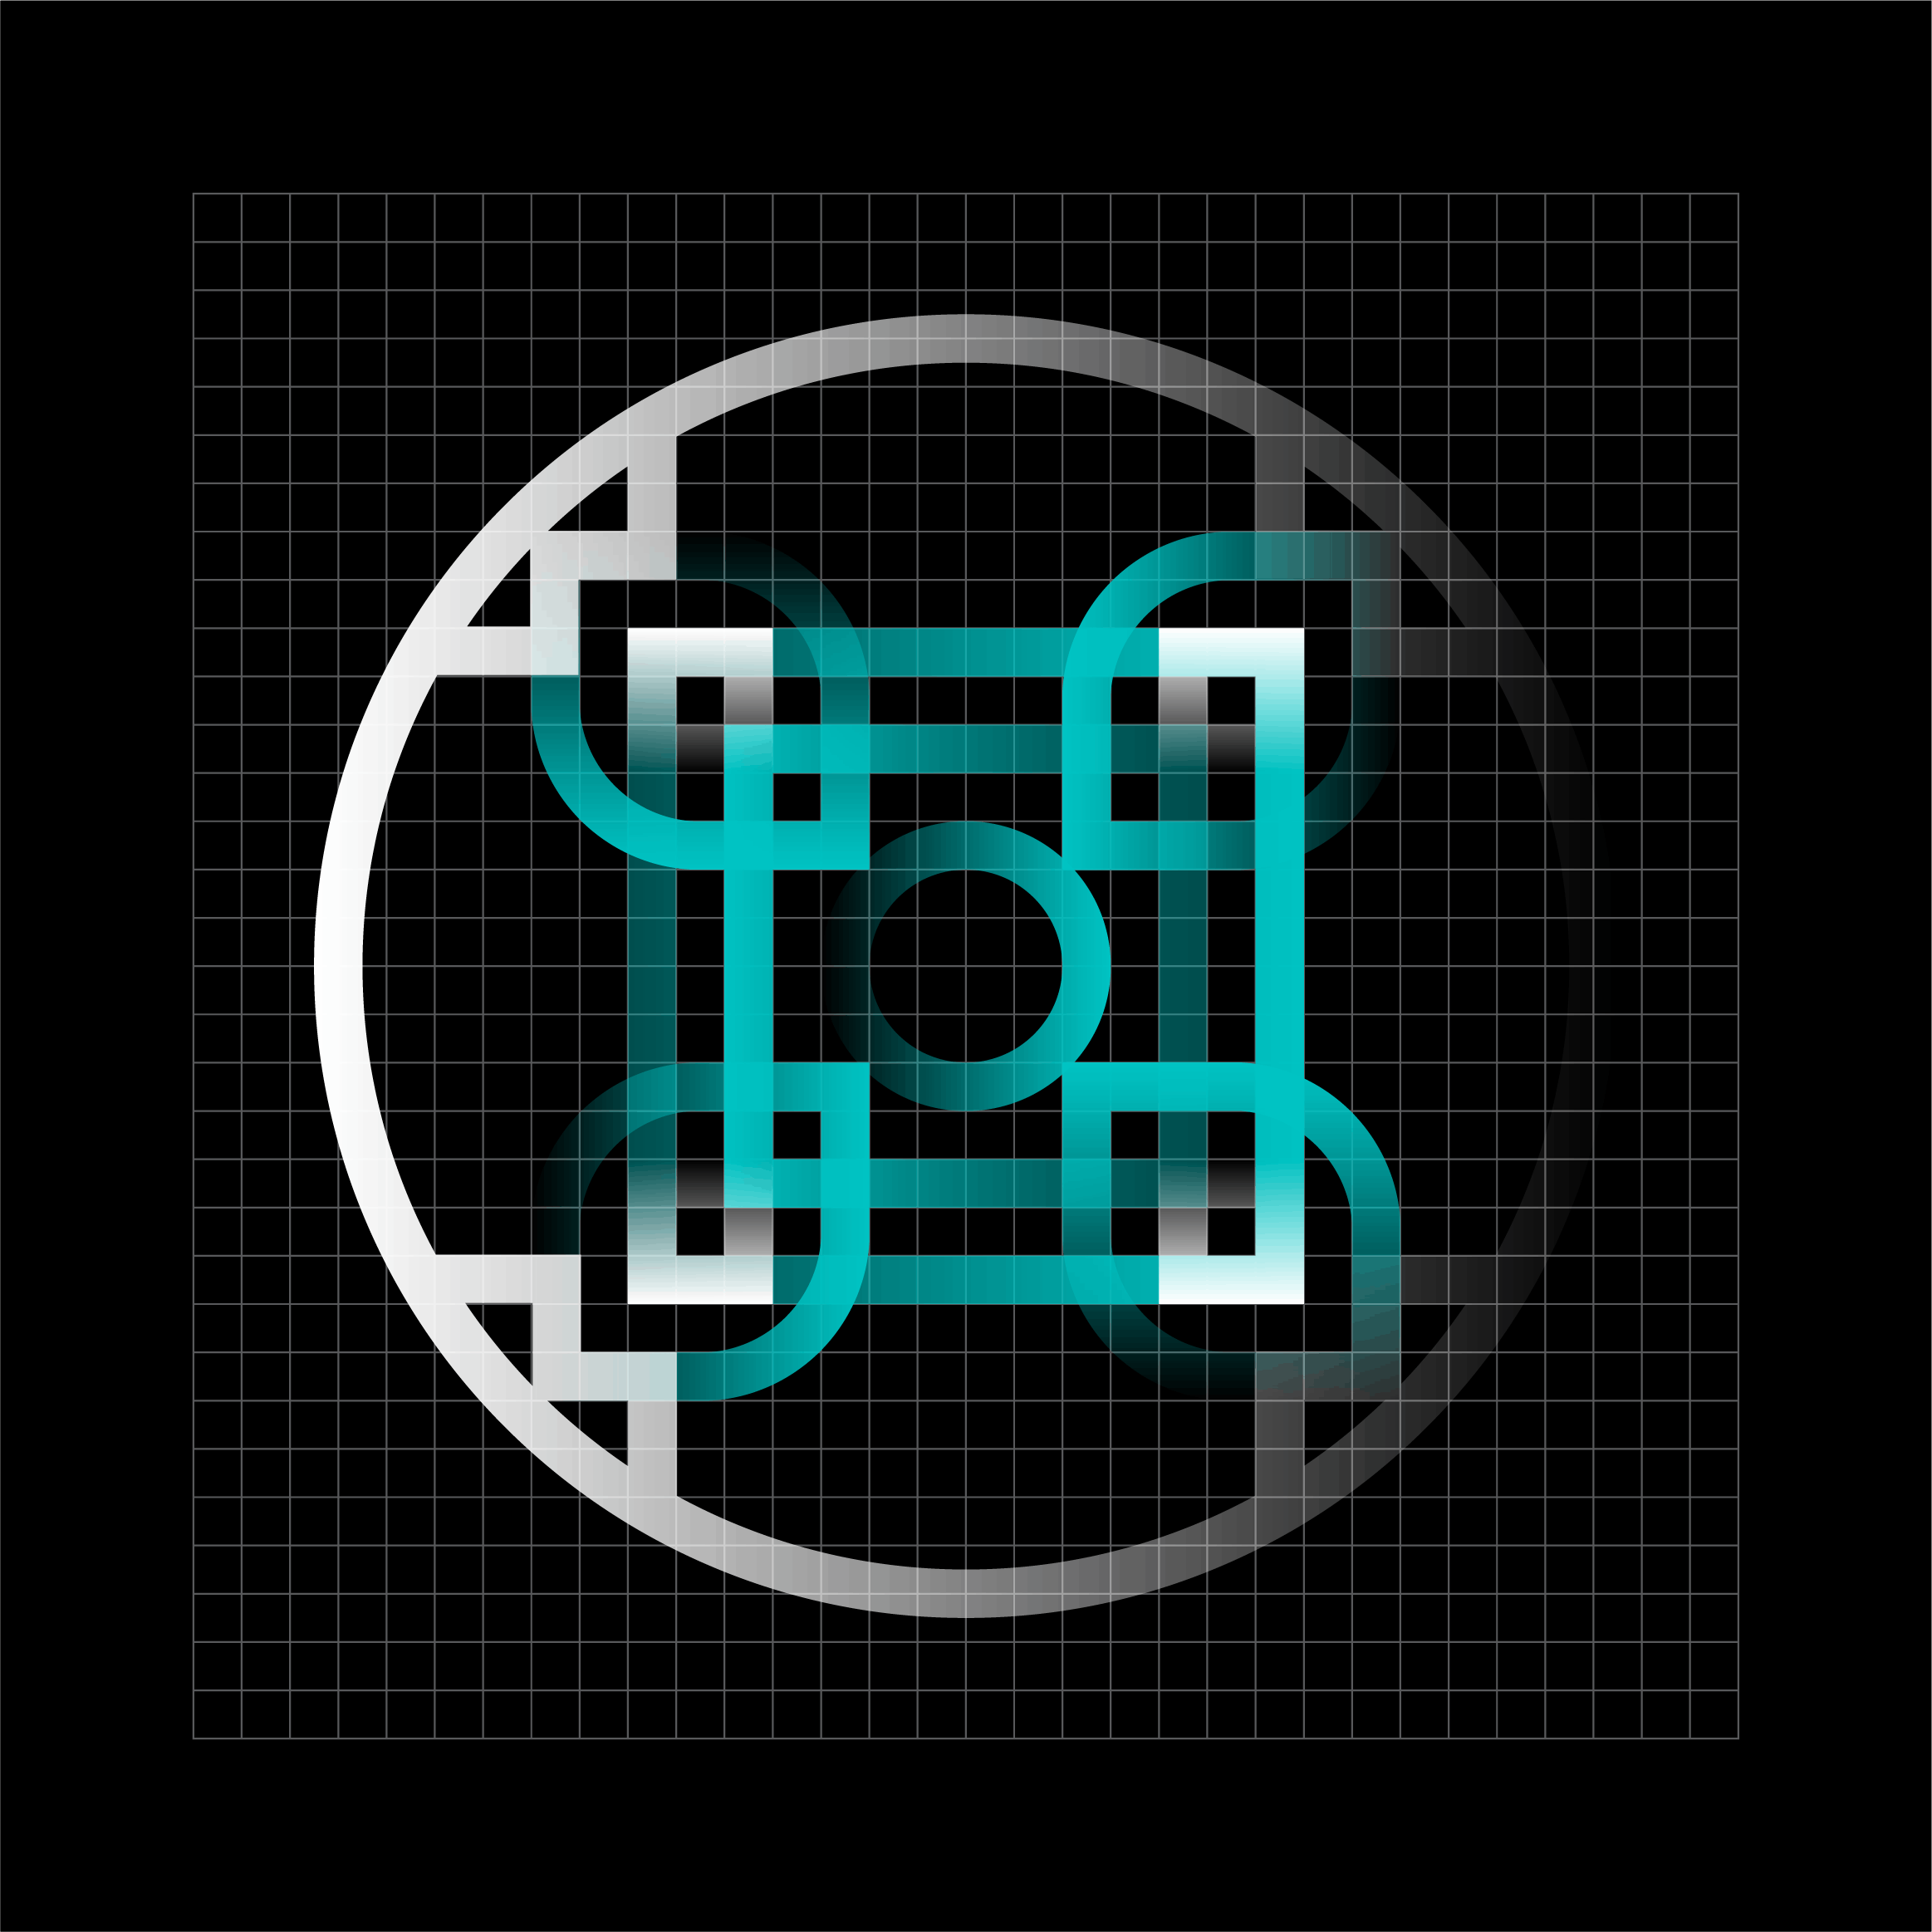 A digital rendering of a shape comprised of a large white circle with two smaller concentric squares in aqua in the center with four additional marquise shapes placed on the corners of the square that extend to the larger circle. The shape is placed within a grid on a black background.